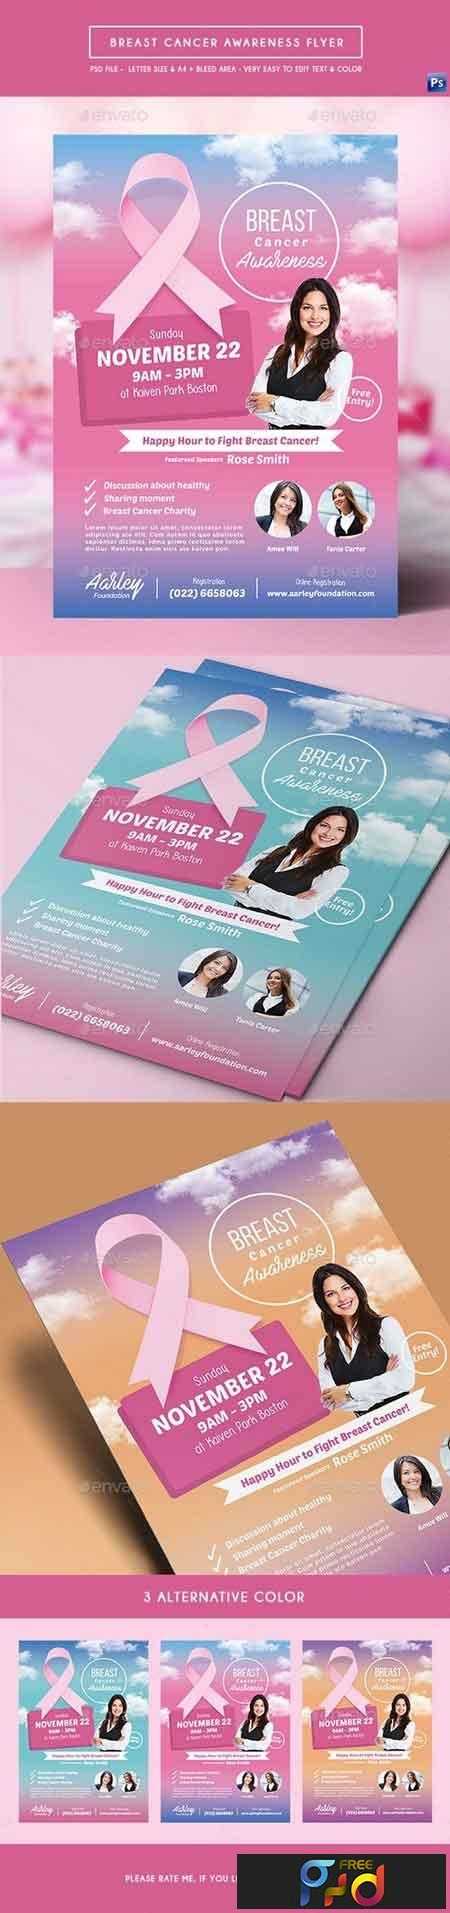 Breast Cancer Awareness Flyer Template Free from freepsdvn.com